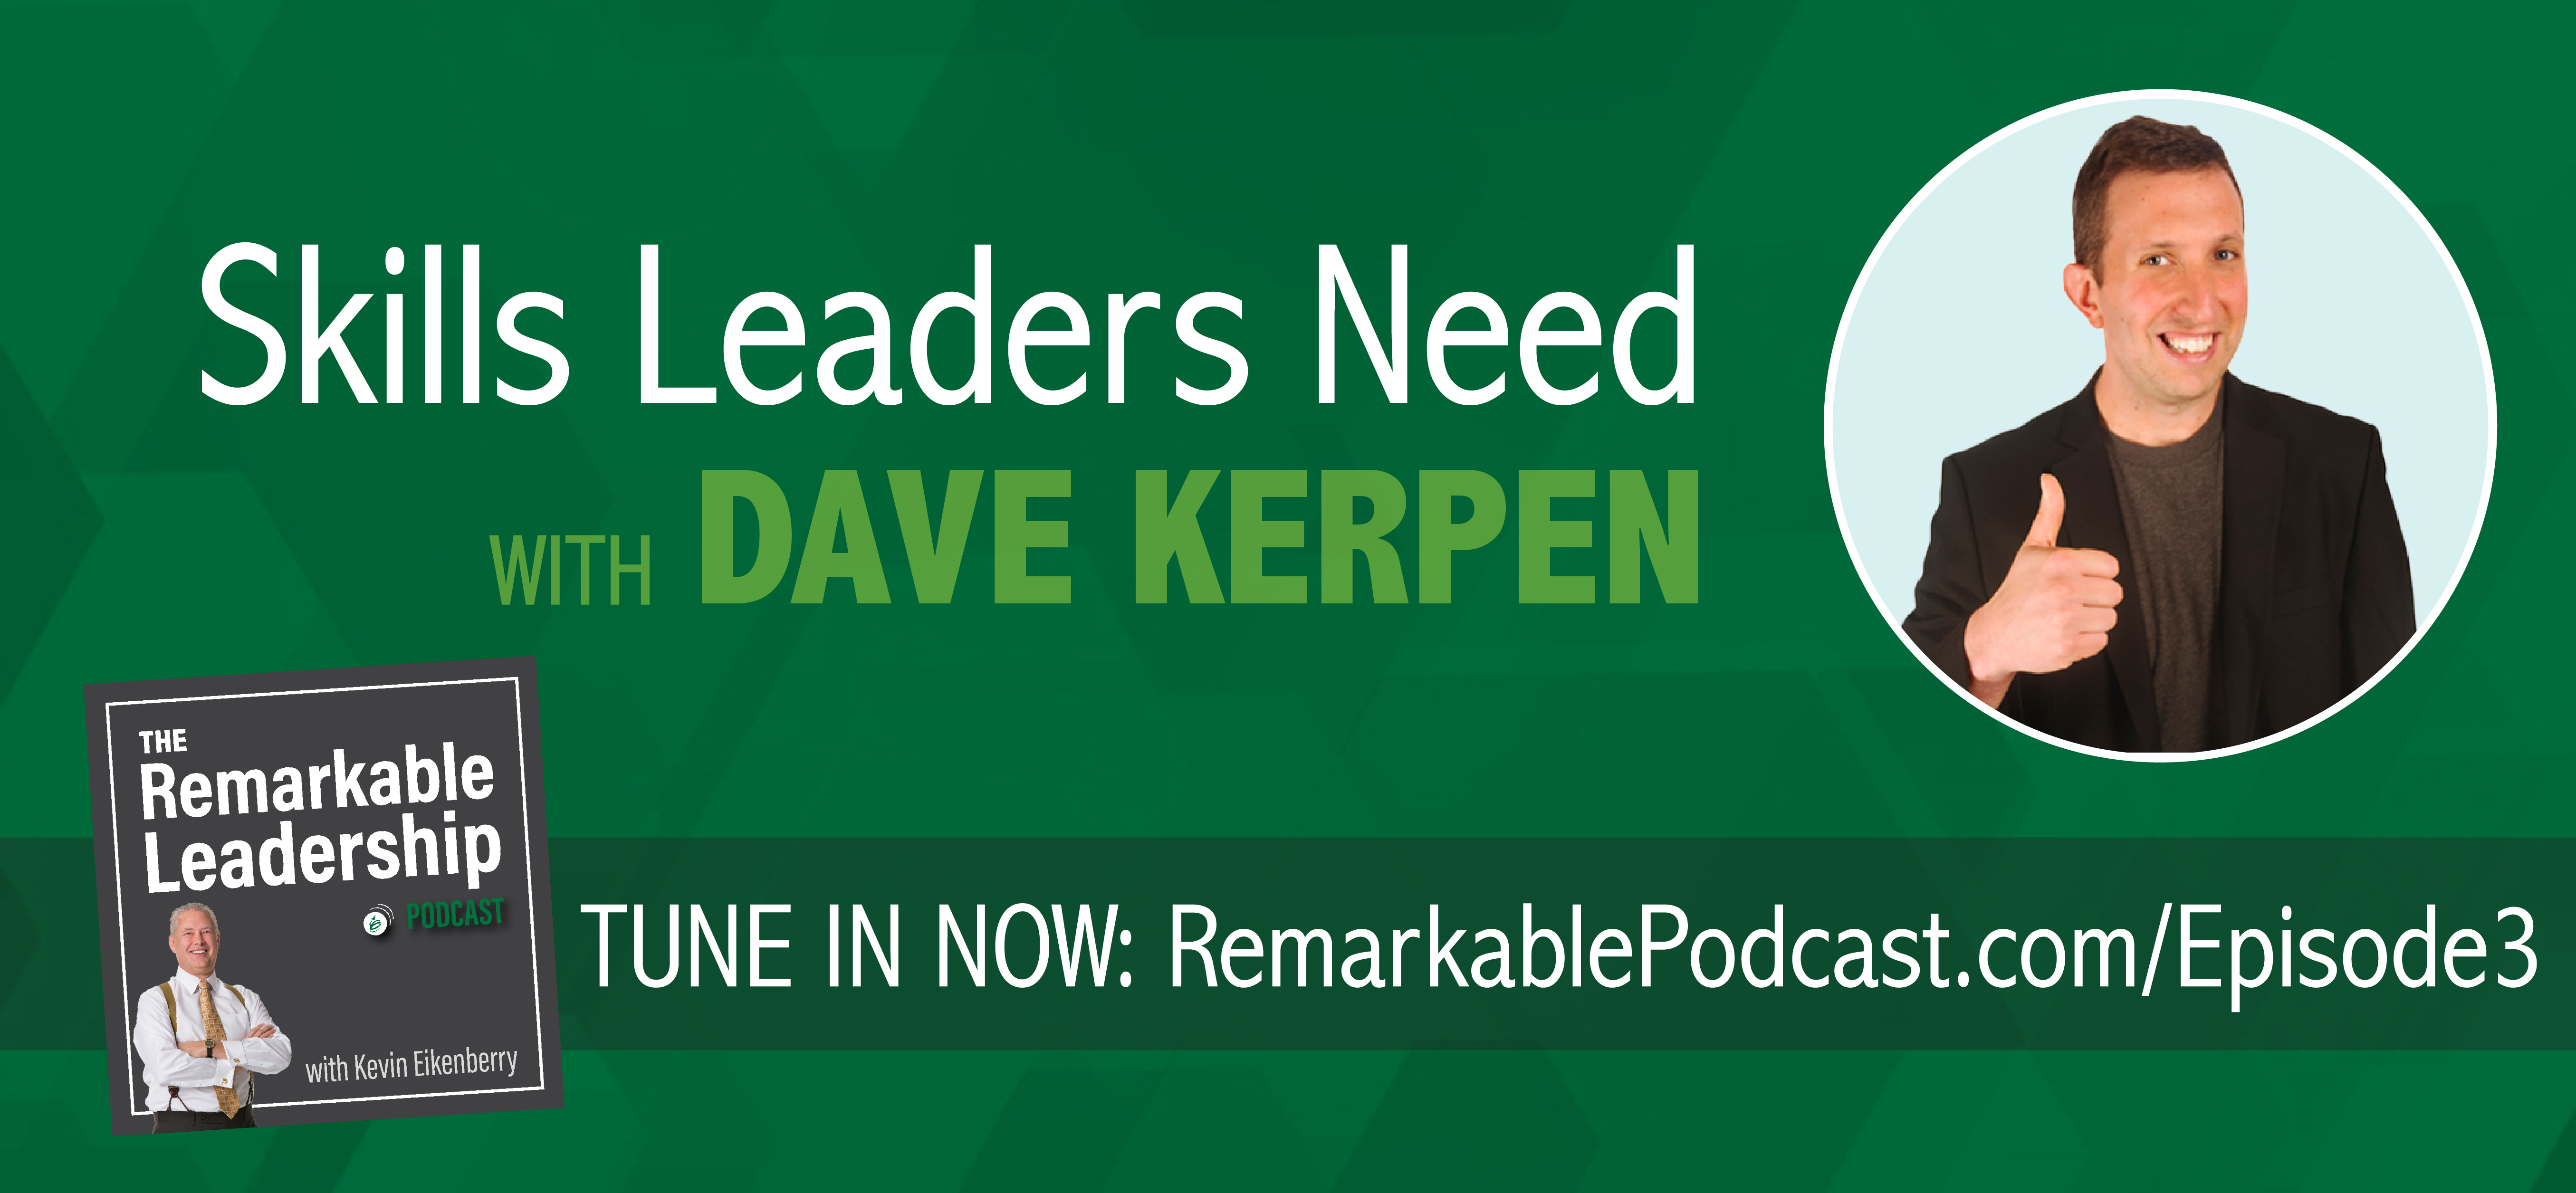 The Remarkable Leadership Podcast - Episode 3: Skills Leaders Need with Dave Kerpen